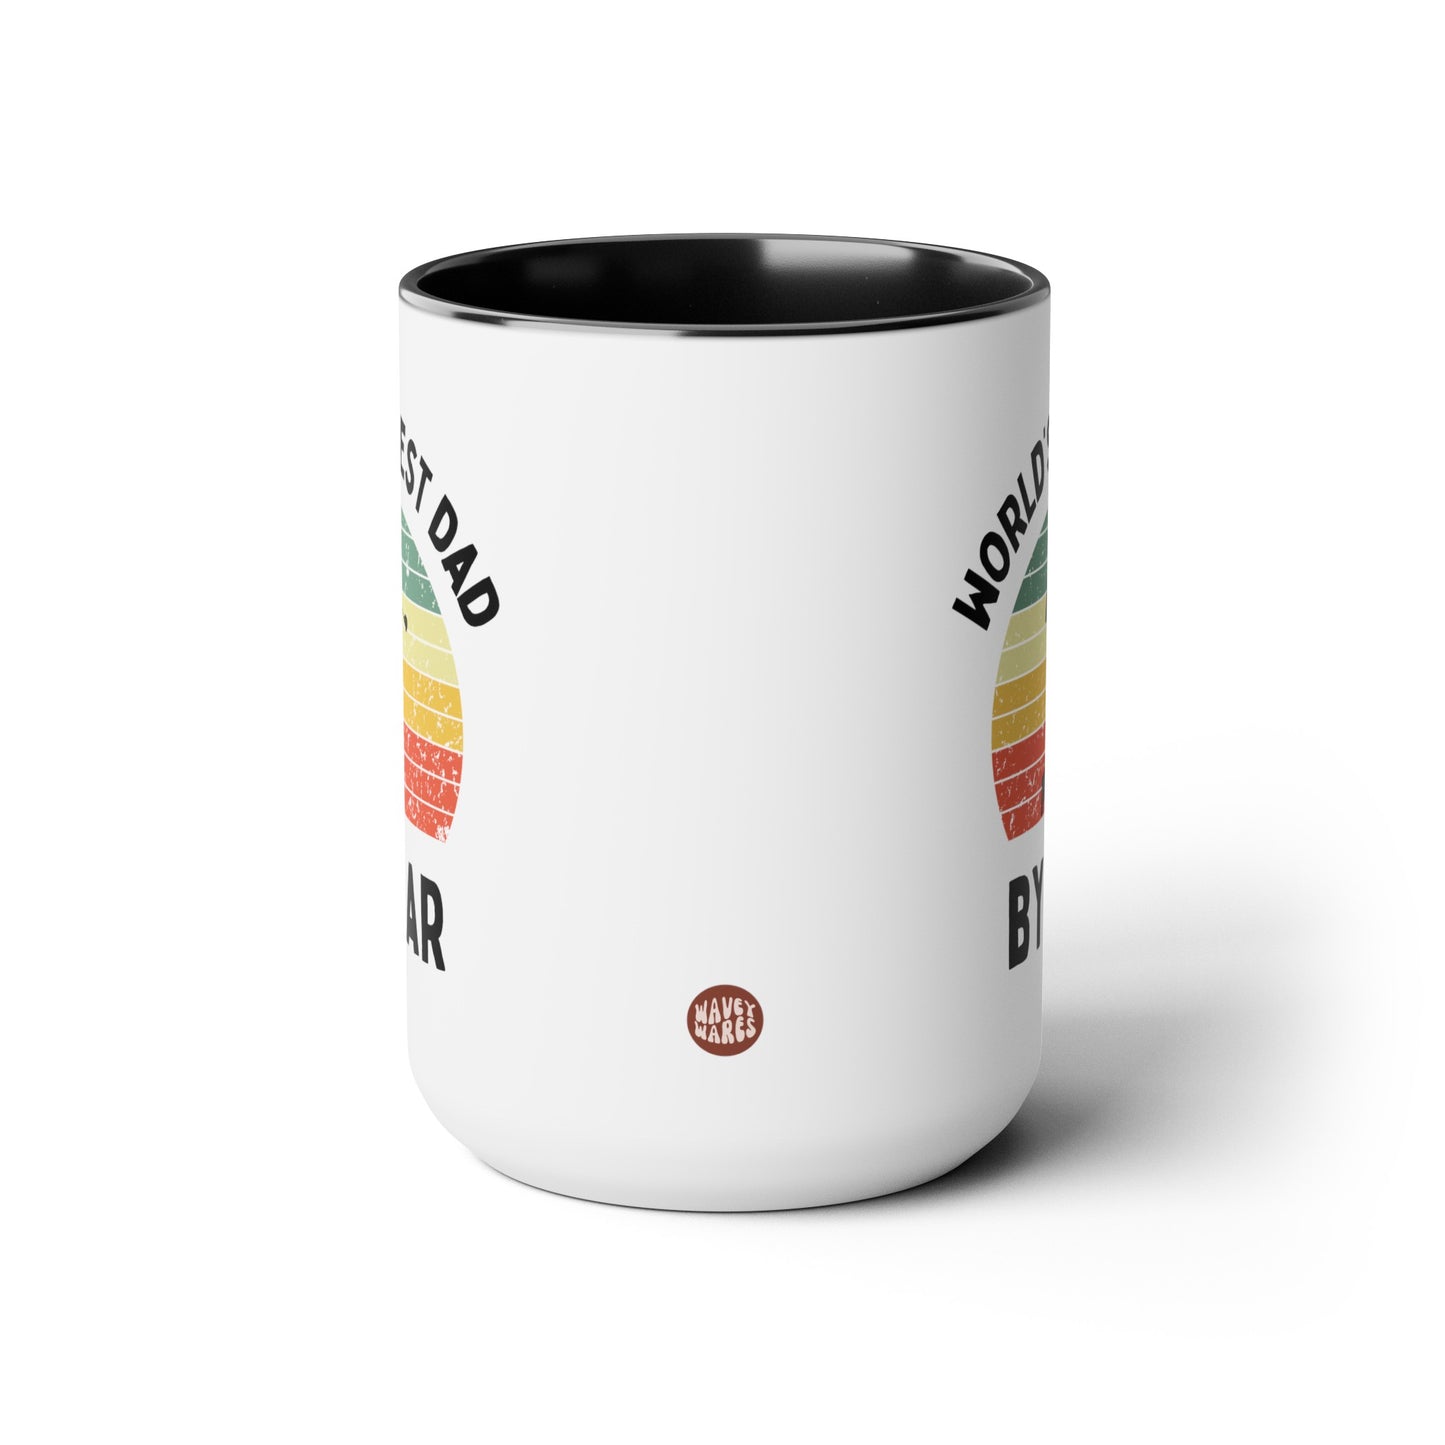 World's Best Dad By Par 15oz white with with black accent large big funny coffee mug tea cup gift for him golfer vintage sunset golf men him pops father's day birthday christmas waveywares wavey wares wavywares wavy wares side